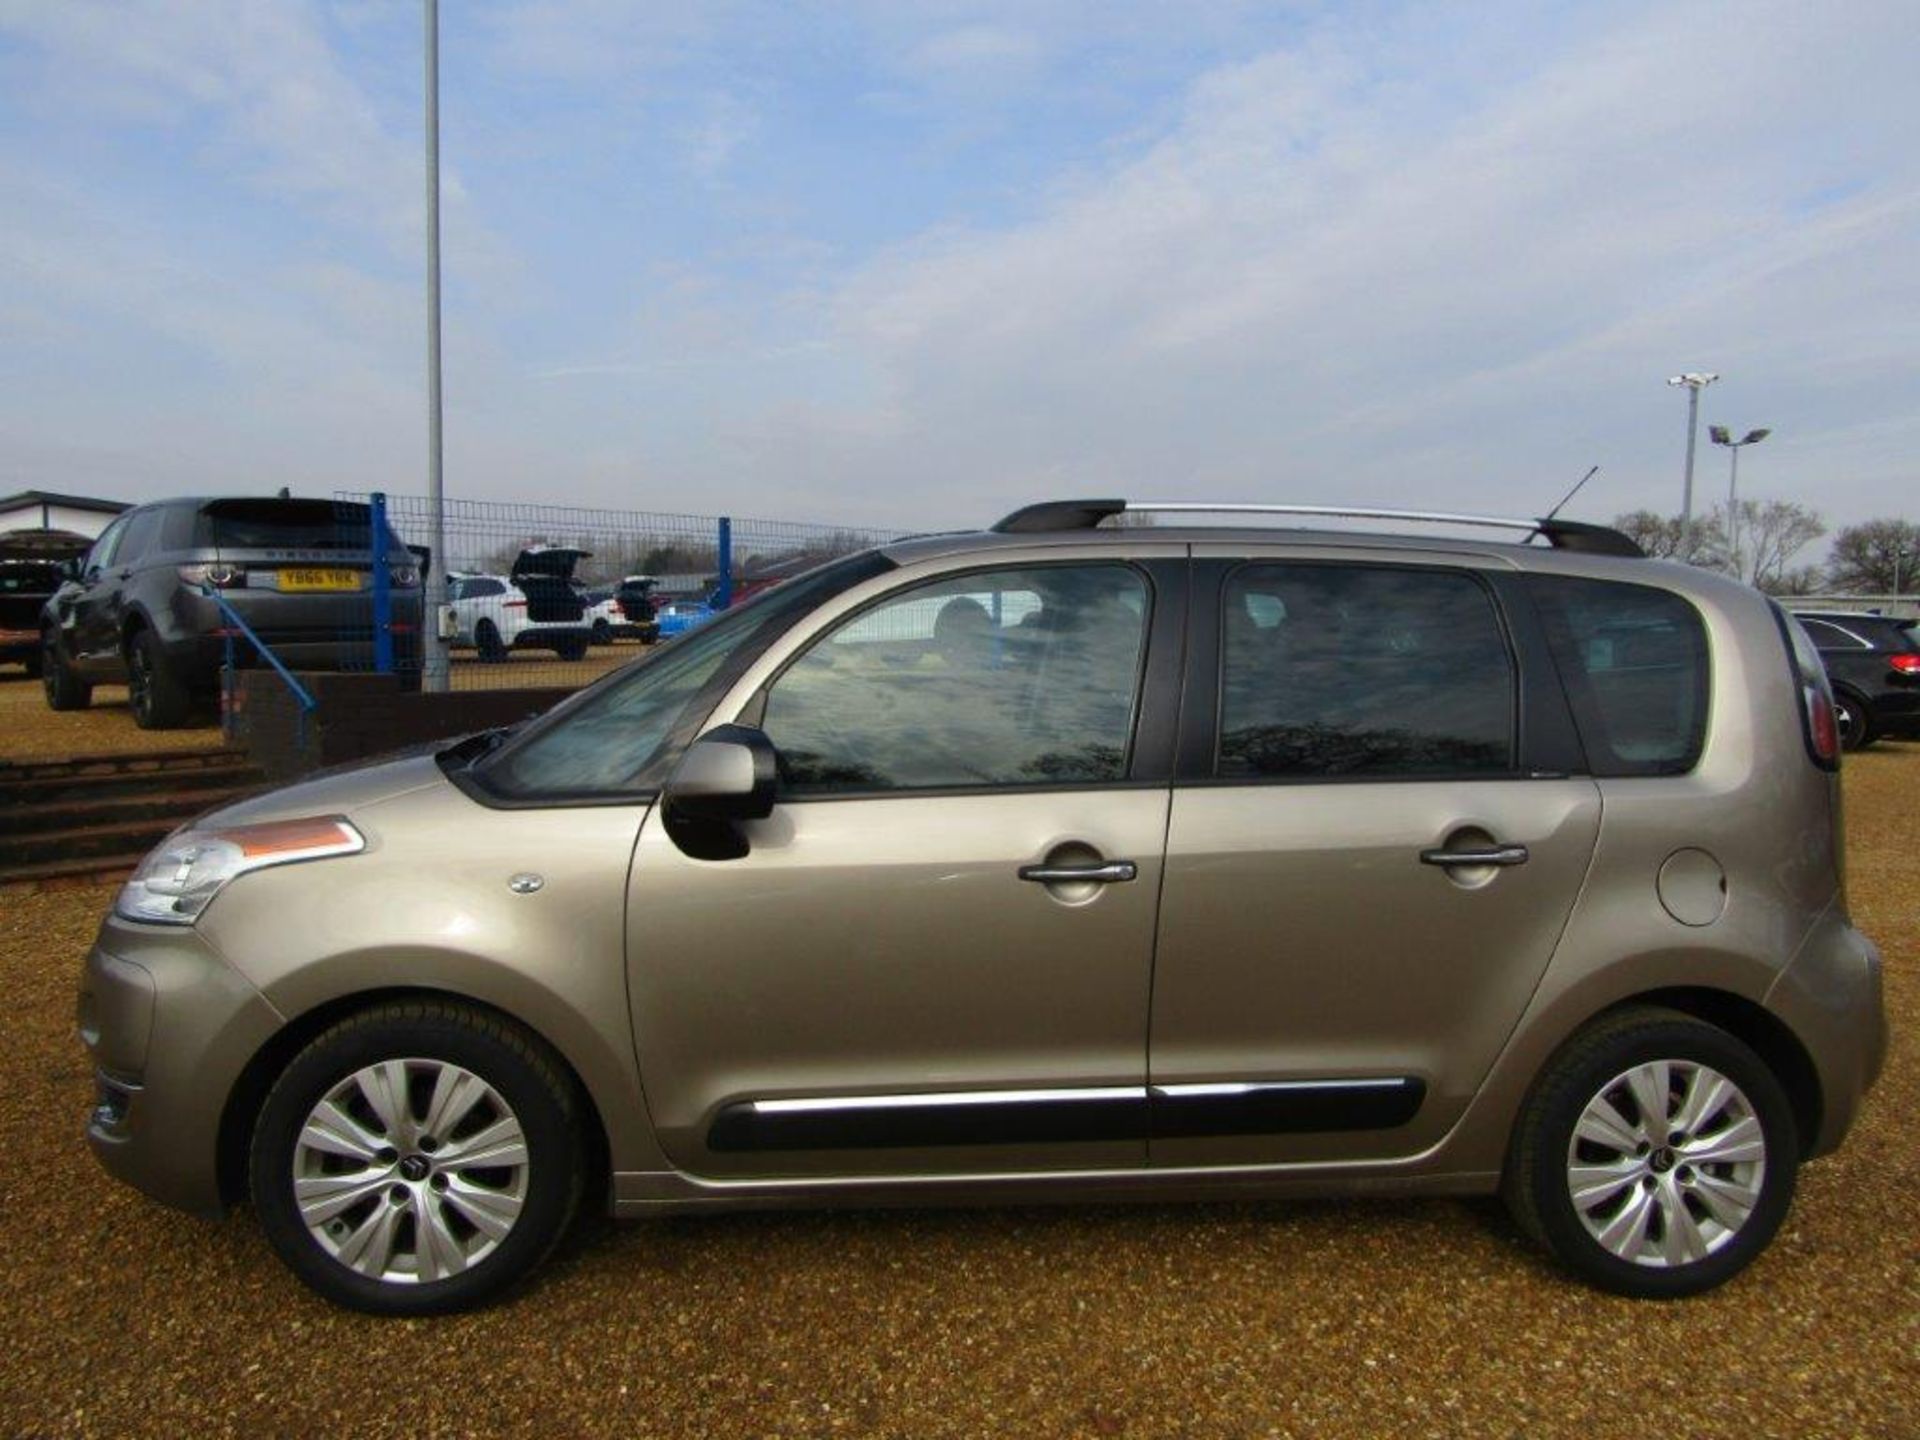 12 12 Citroen C3 Picasso Excl HDI - Image 24 of 25